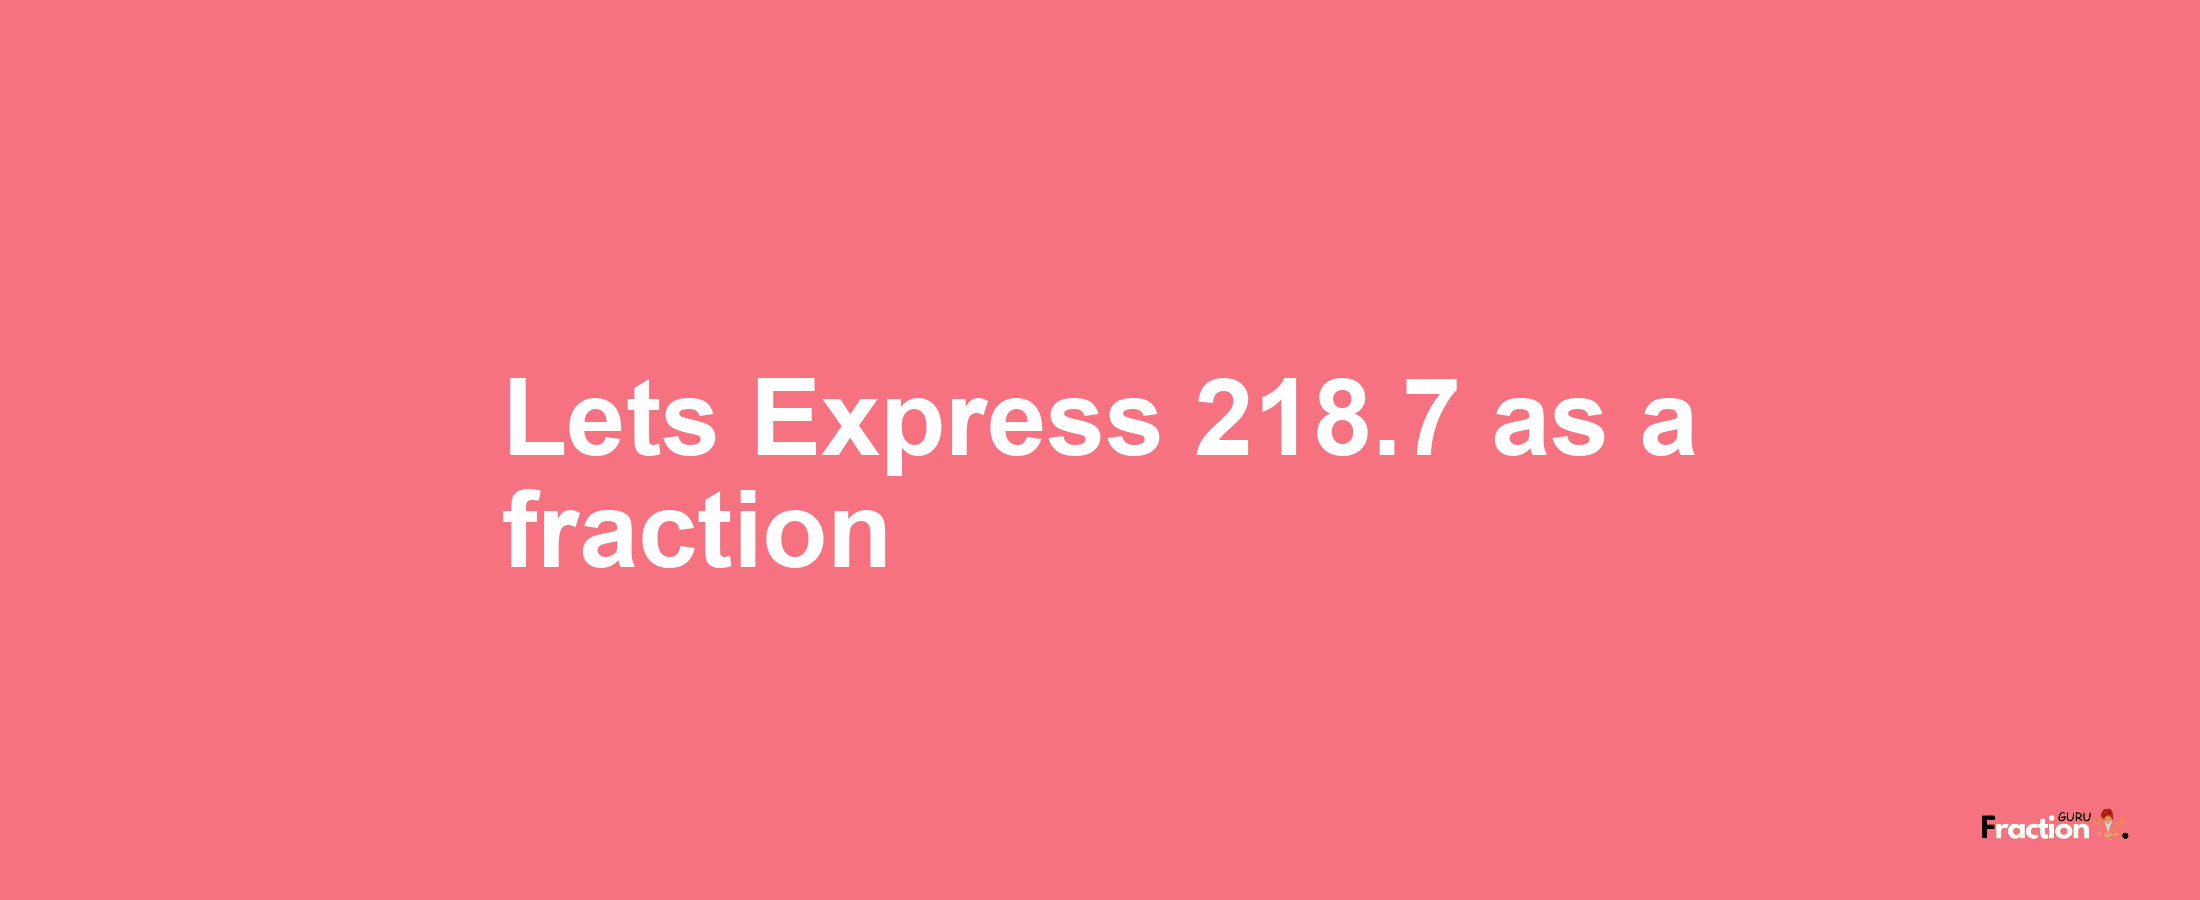 Lets Express 218.7 as afraction